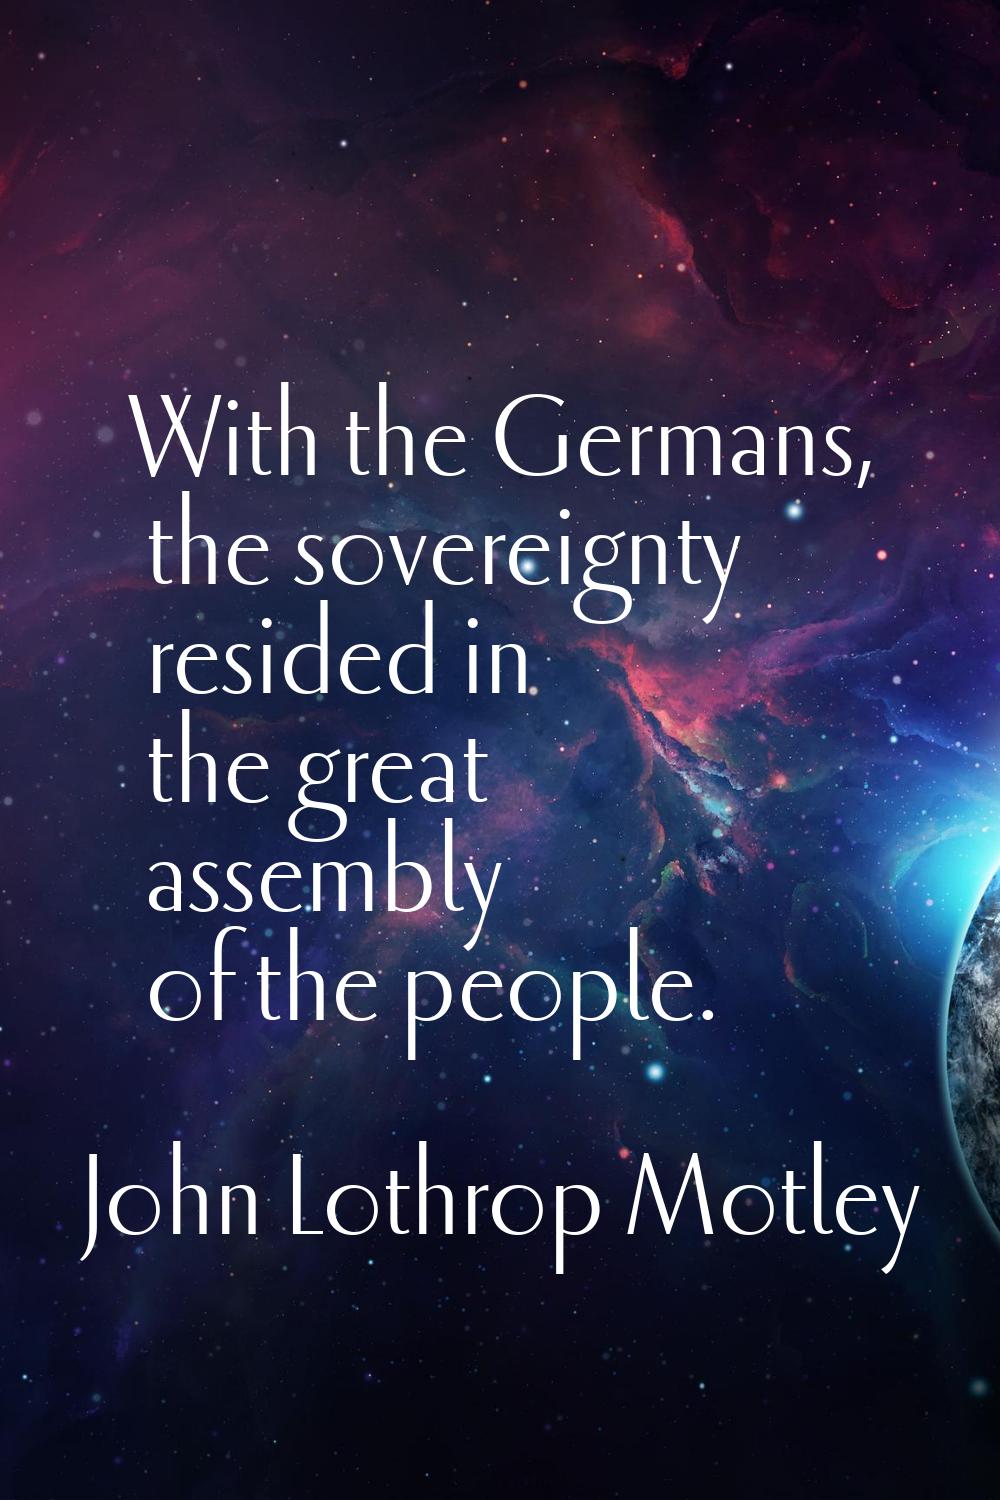 With the Germans, the sovereignty resided in the great assembly of the people.